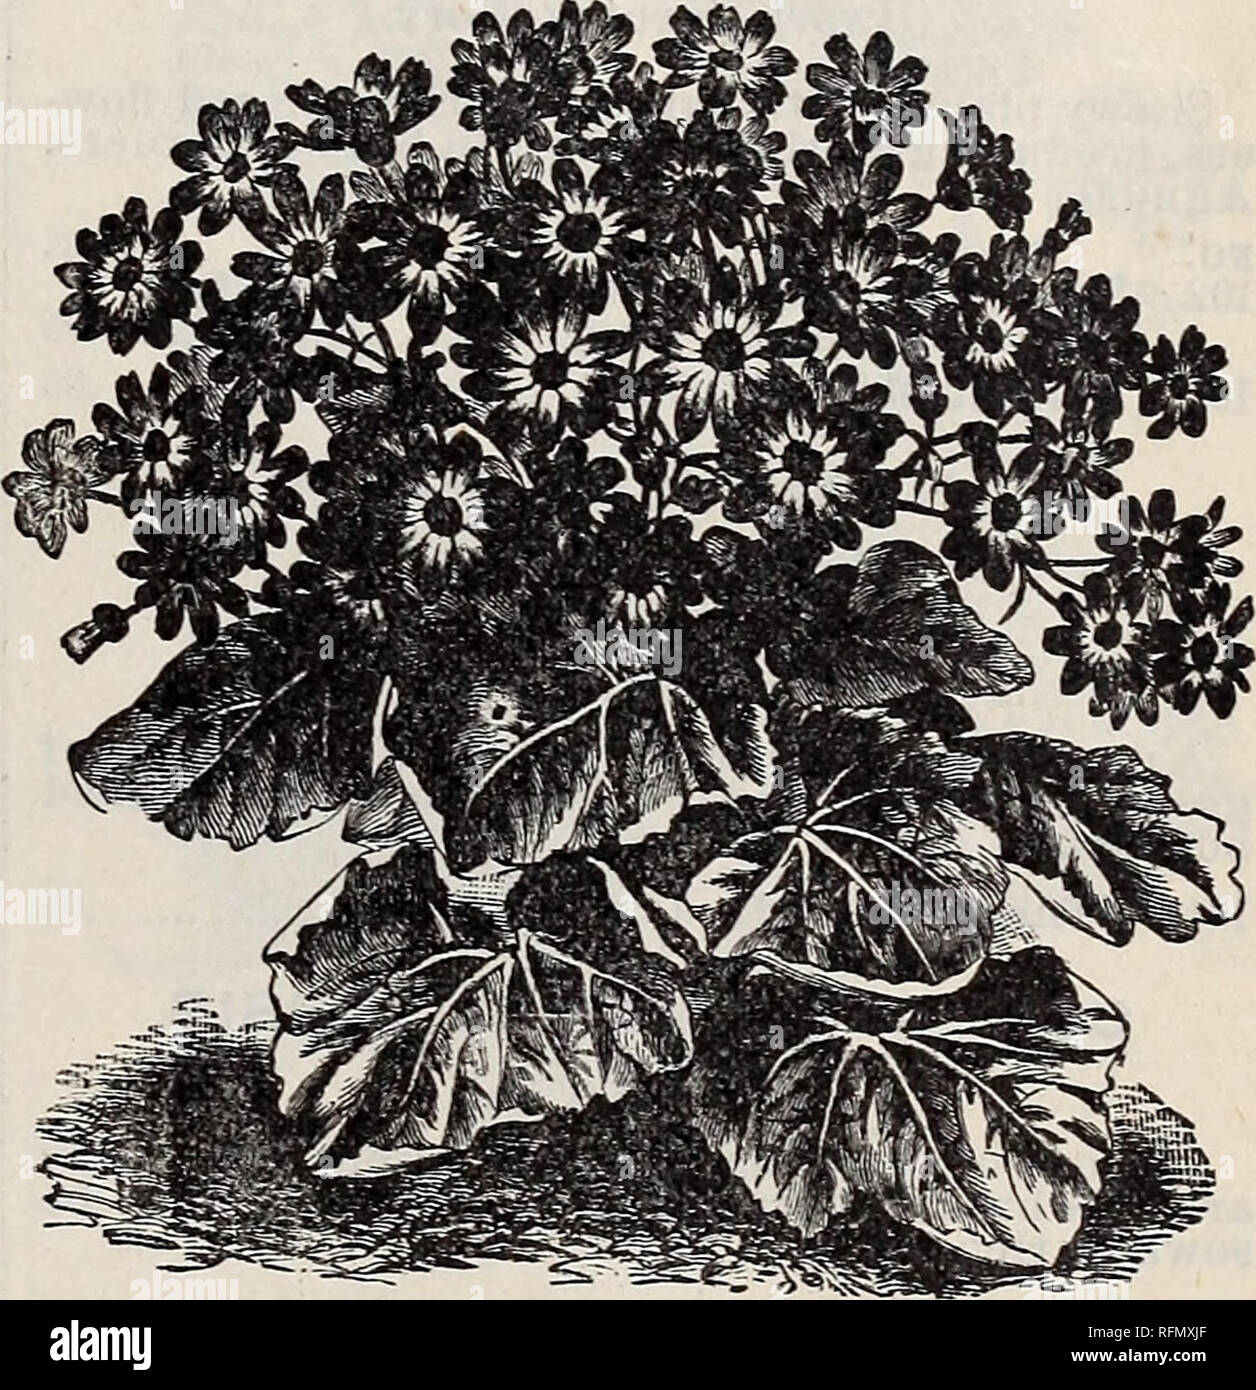 . Seeds and bulbs for 1899. Nursery stock Ohio Cleveland Catalogs; Vegetables Seeds Catalogs; Flowers Seeds Catalogs; Gardening Equipment and supplies Catalogs. CHRYSANTHEMUM. CHRYSANTHEMUM. (Wucherblume. Goldblume.) Showy and effective garden favorites. The an- nual varieties are in great demand, and extensive- ly grown for cut flowers, making a fine pot plant for winter, and excellent for beds or borders through the summer. Succeed best in loam and rotted manure, equal parts. NO. PKT. 91. Crutescens. (White Marguerite, or Paris Daisy) 10 92. Chinese Largs Flowered. Double mixed, well-known v Stock Photo